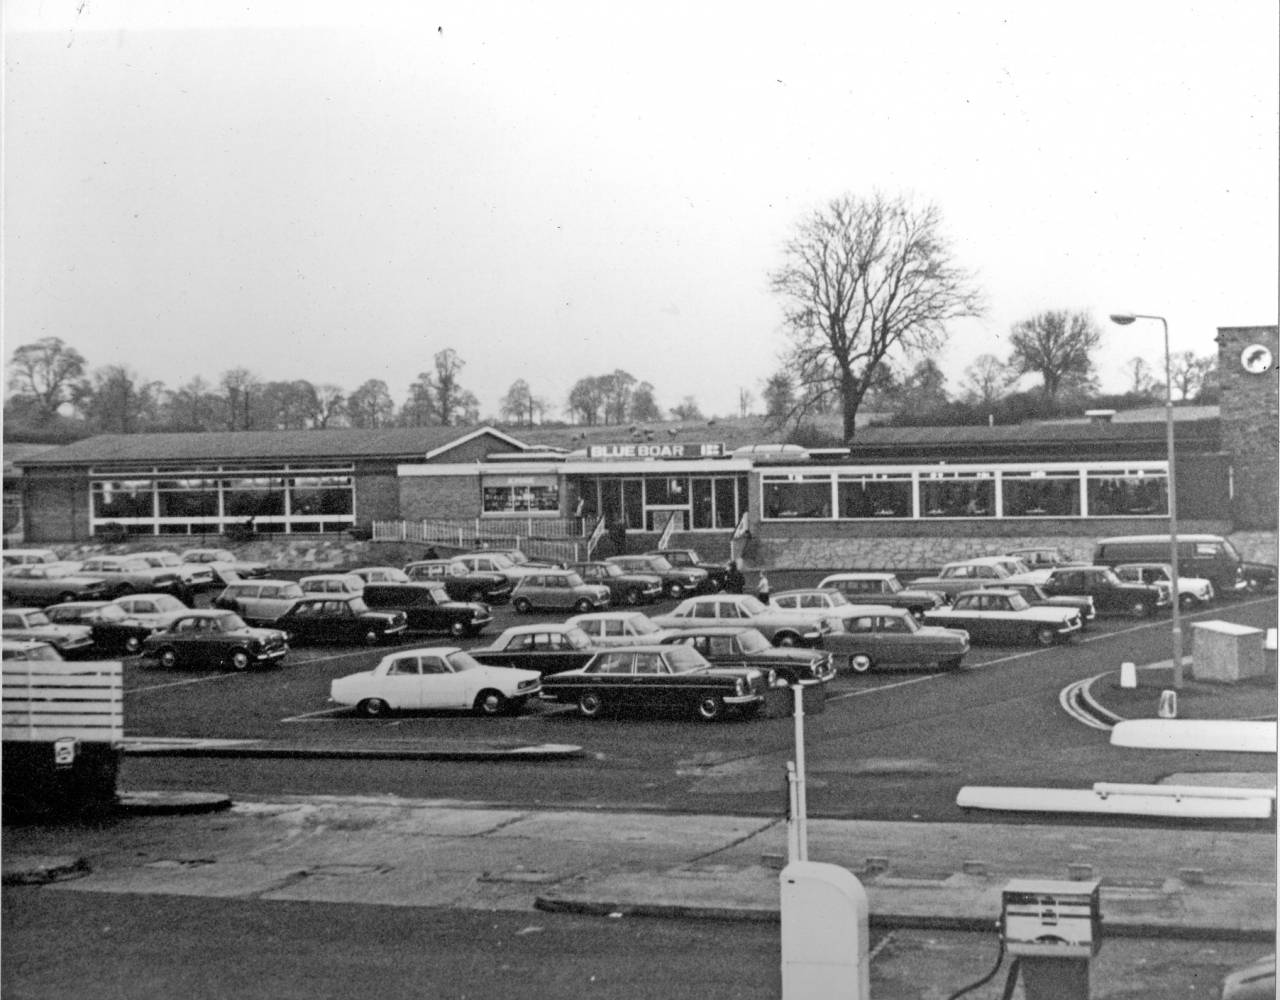 Watford Gap Blue_Boar_car_park the original northbound building and car park. The restaurant is on the left and transport café is on the right.